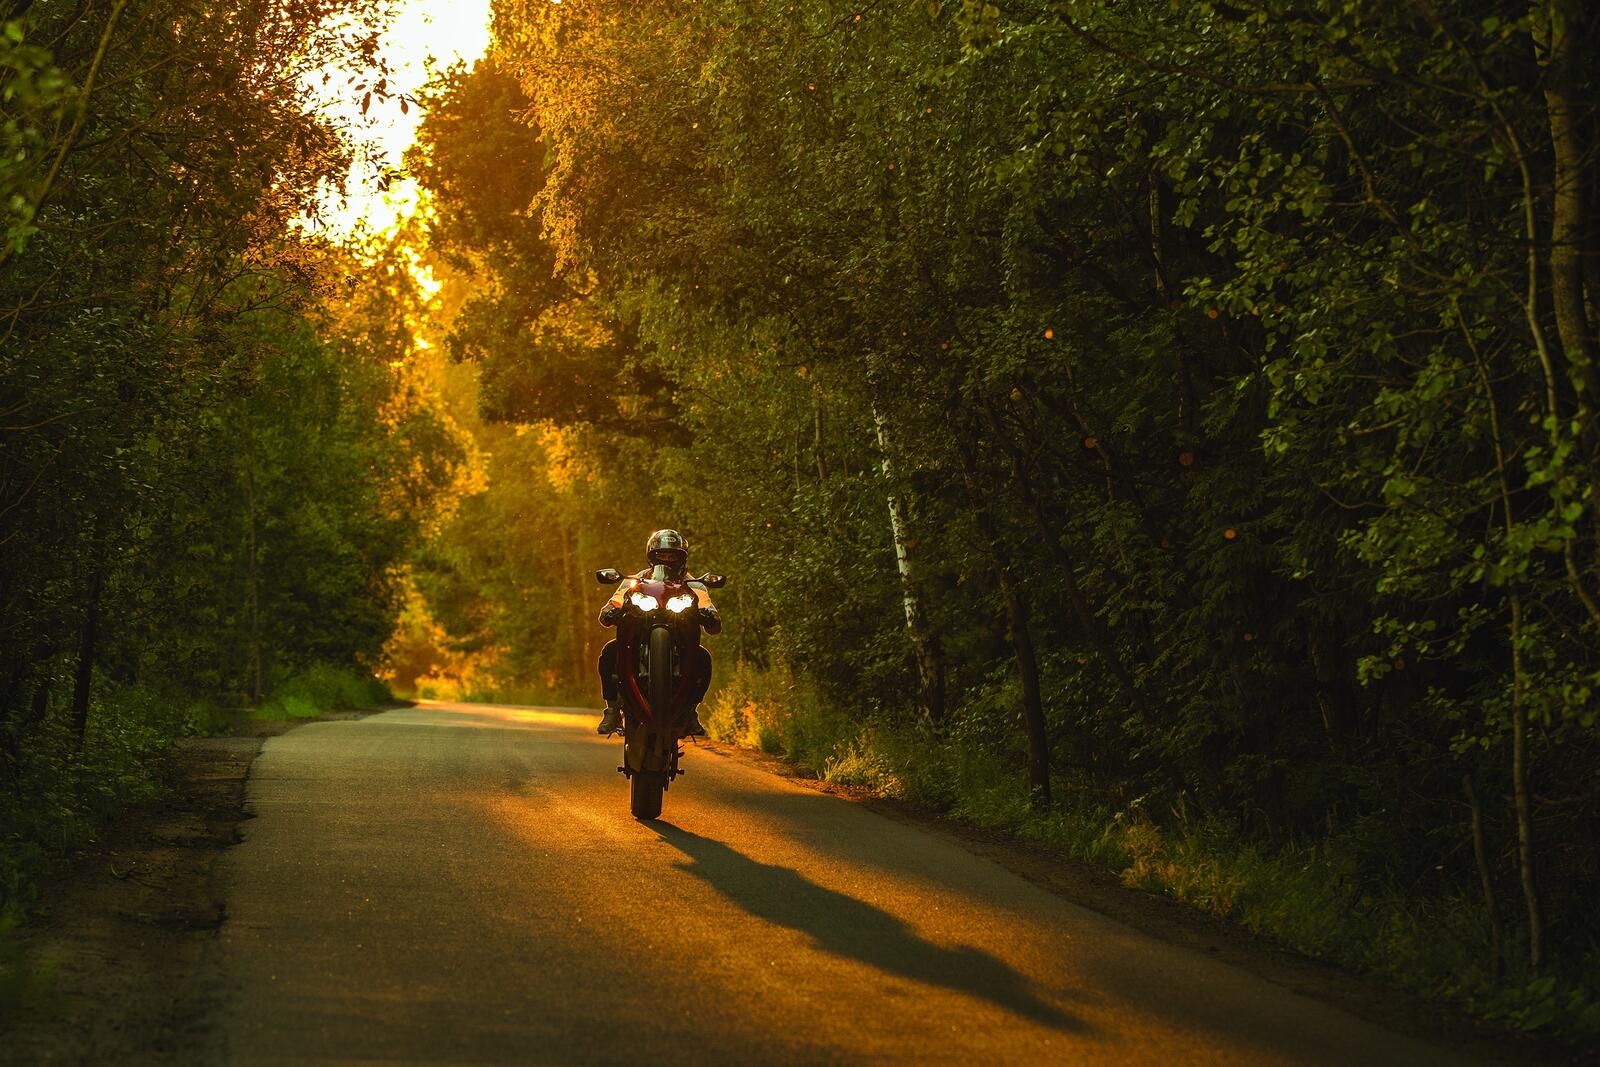 Free photo Honda cbr 1000 riding on the rear wheel through the woods at sunset